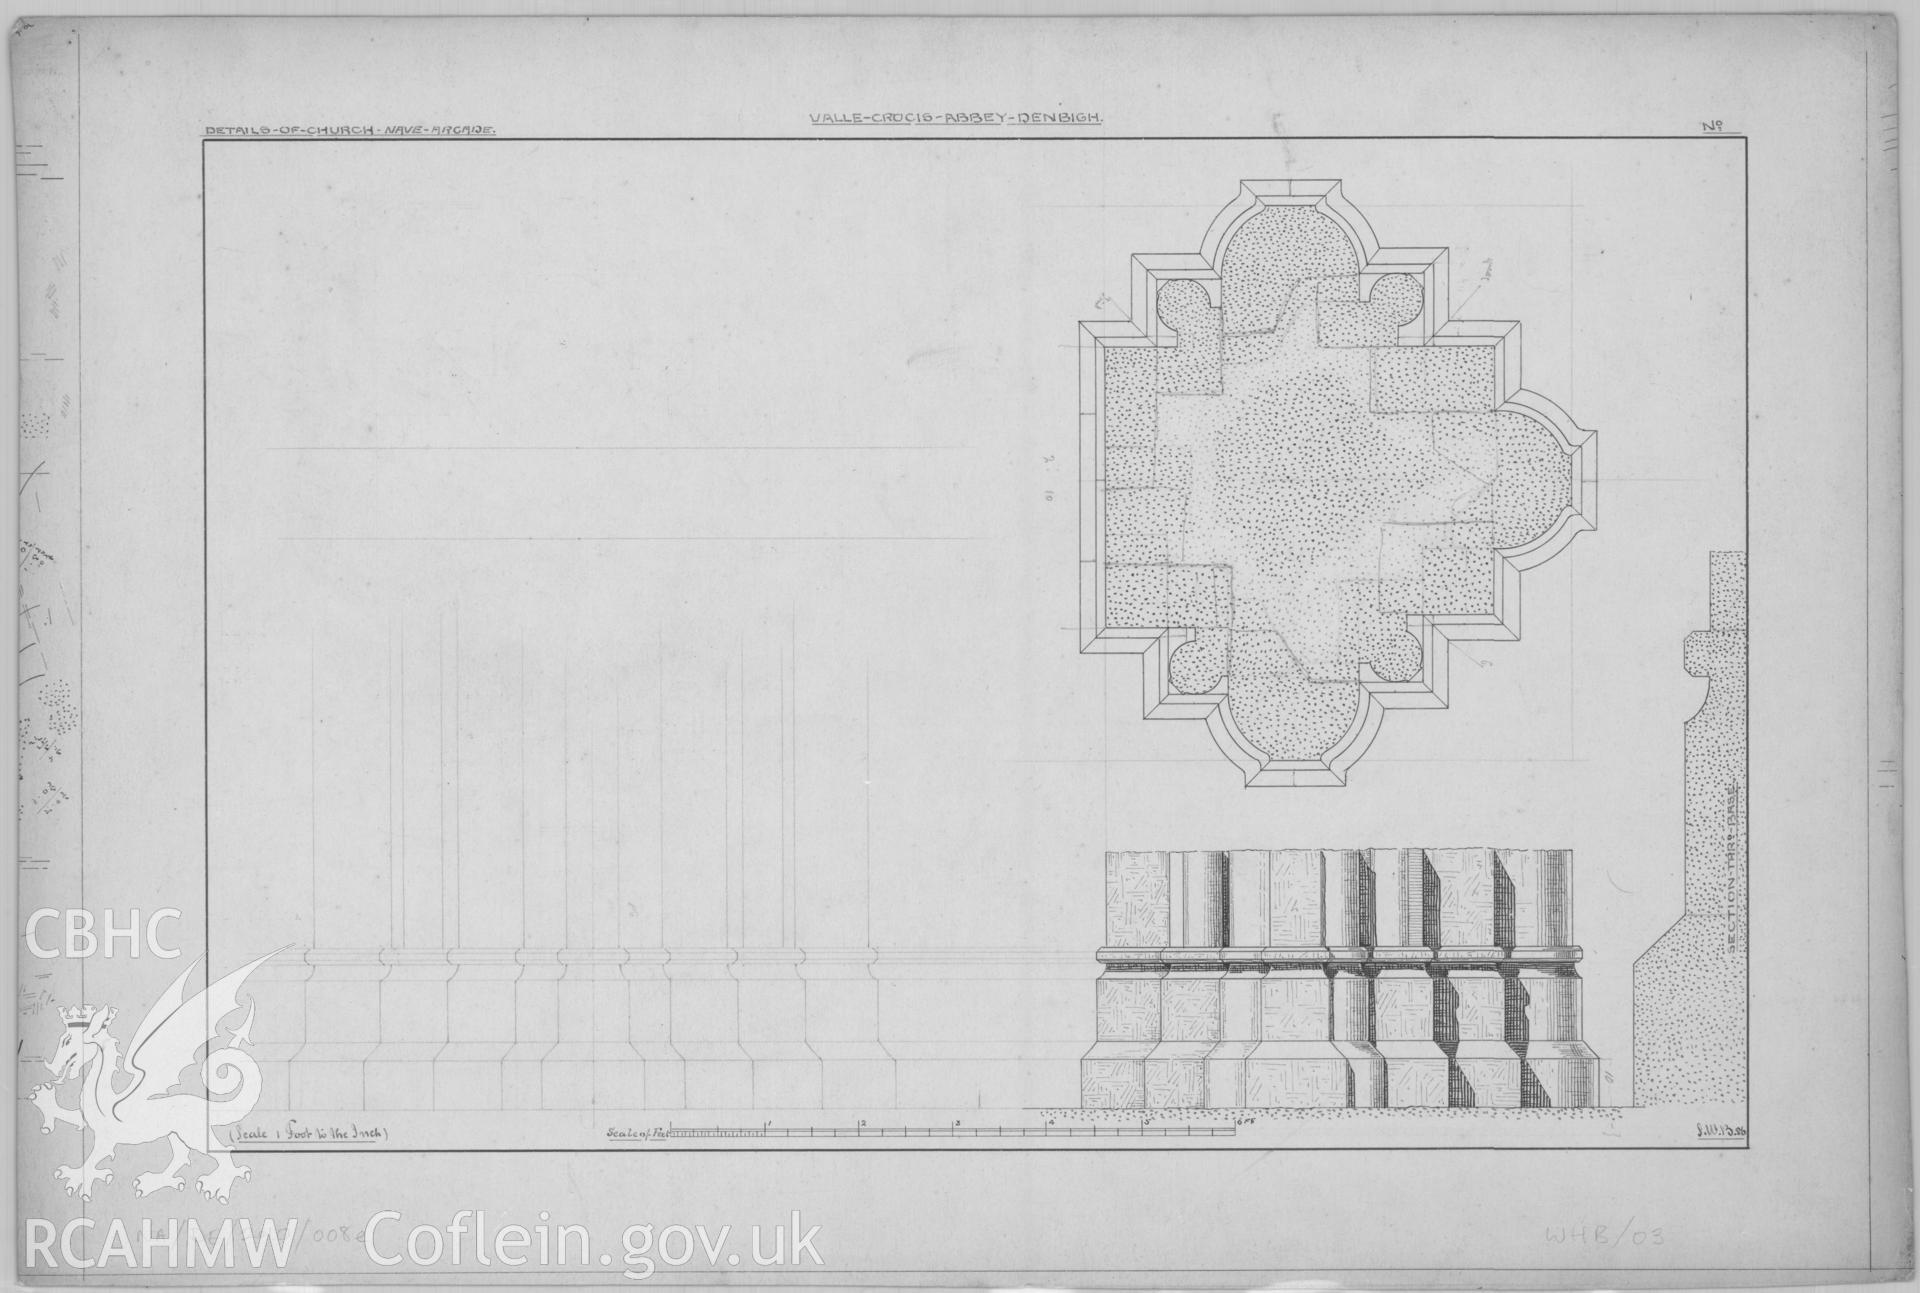 Original architectural drawing in pencil and ink showing details of the Church Nave at Valle Crucis Abbey, including the arcade. Produced by Hayward Brakspear and Sons in 1886.